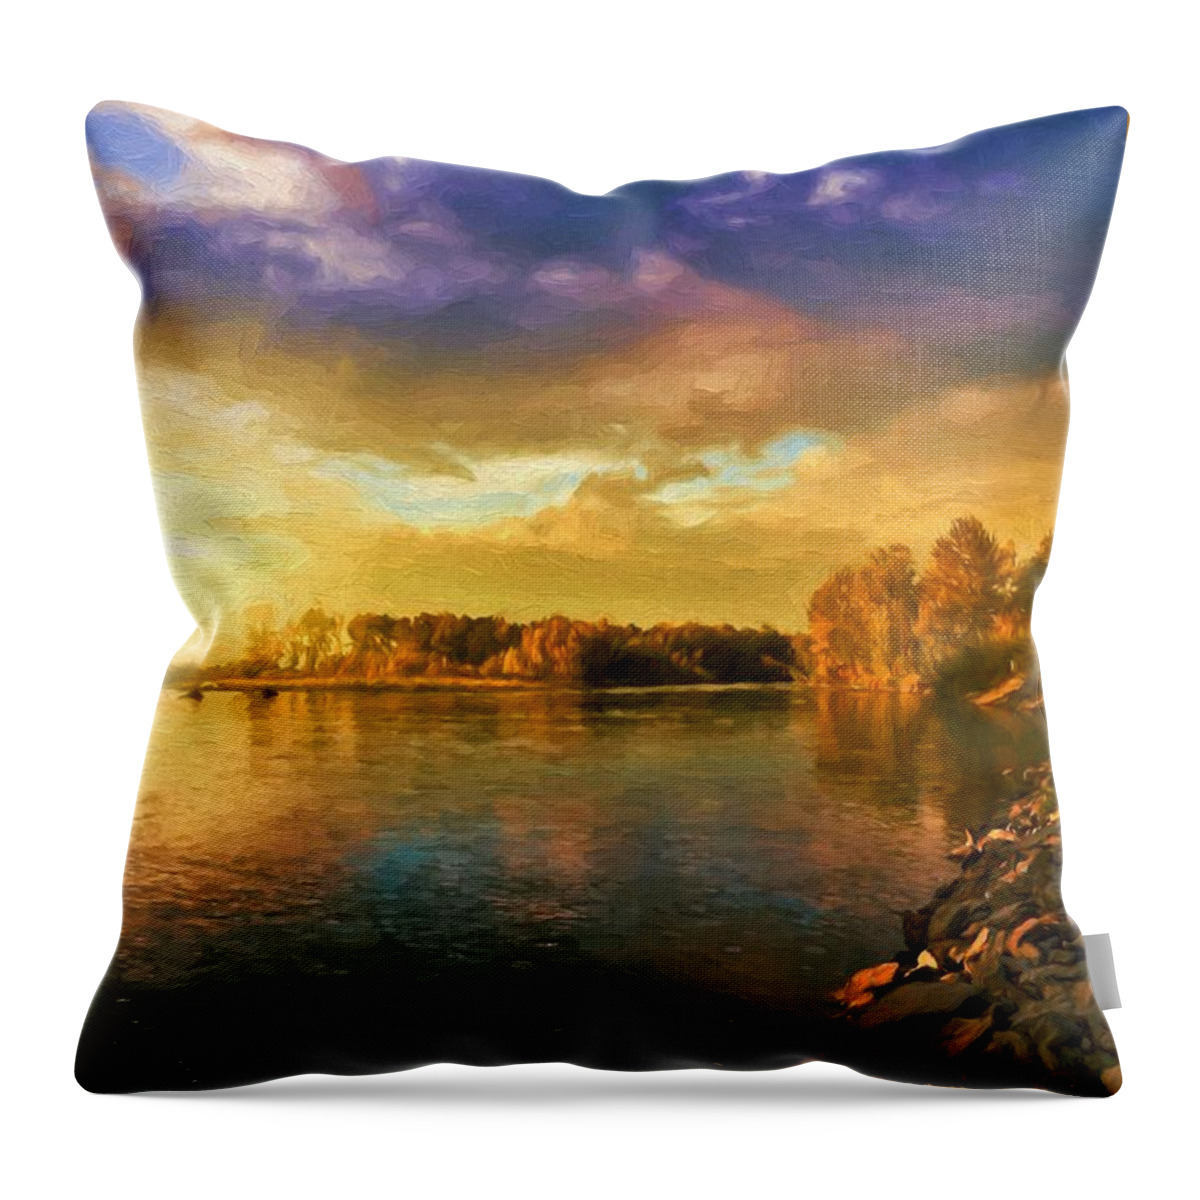 Landscape Throw Pillow featuring the digital art River Sunset by Charmaine Zoe